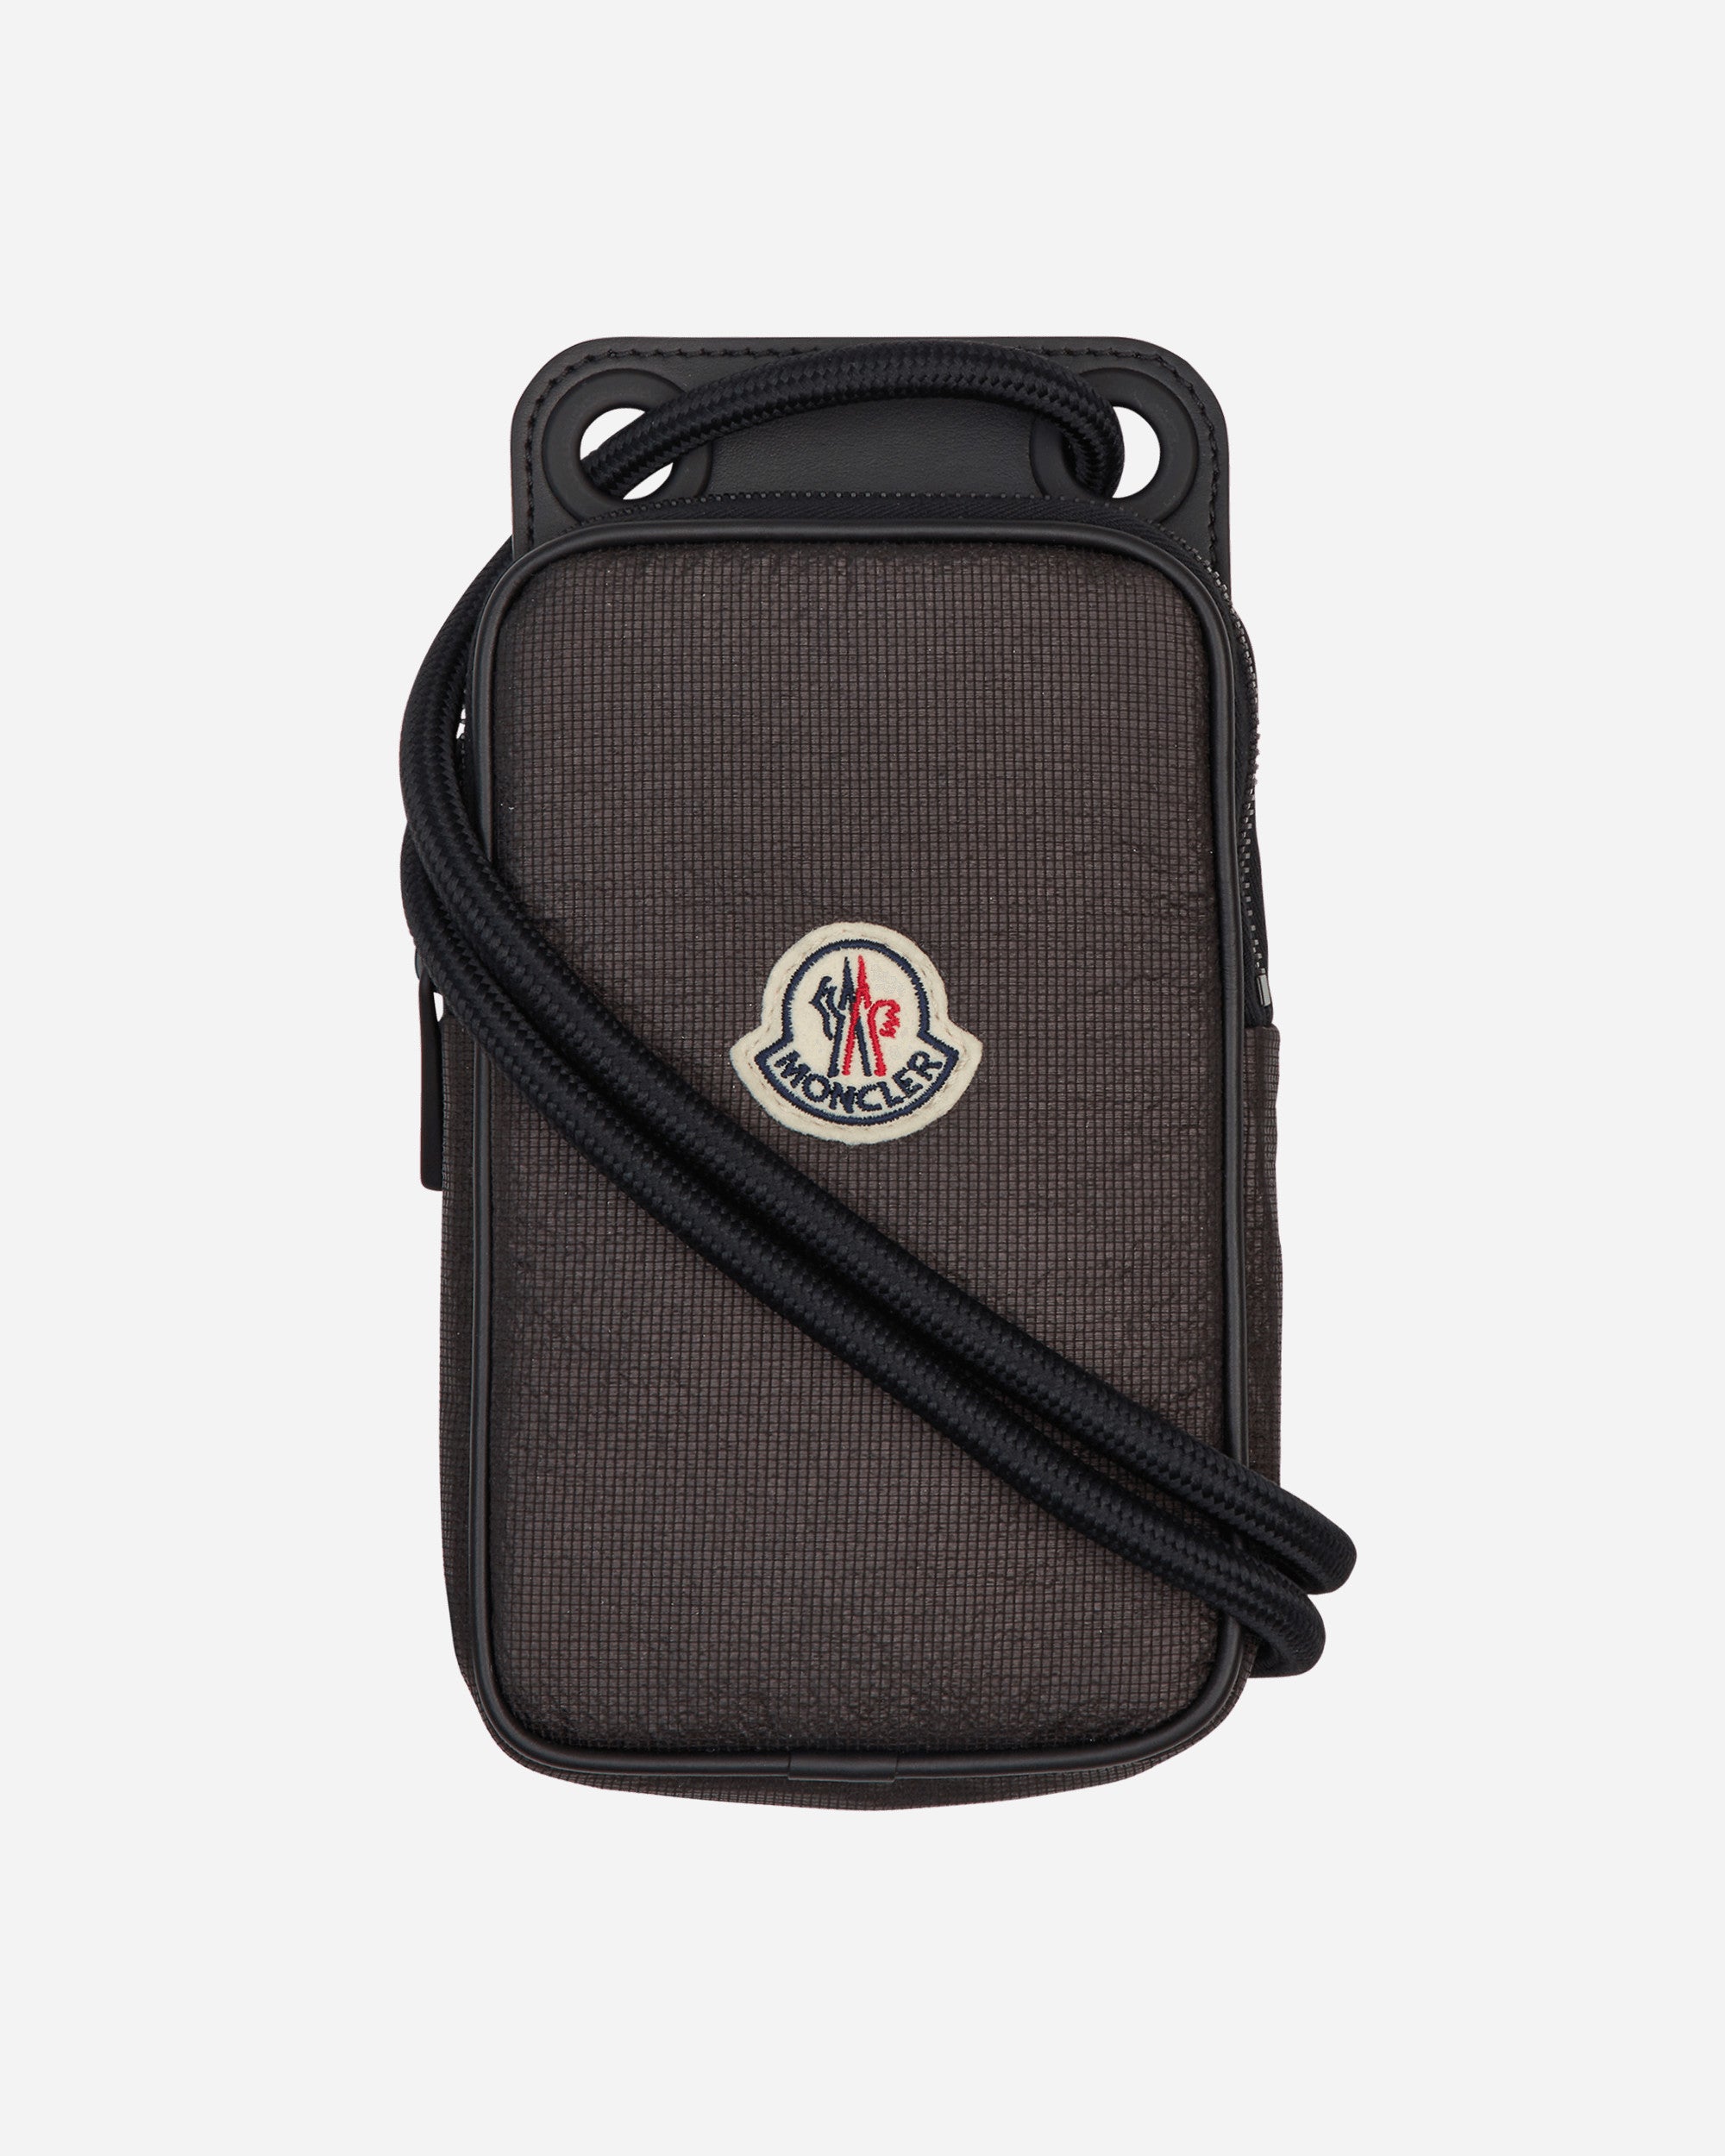 Moncler Phone Case Black Bags and Backpacks Cases H109A6B00001 999